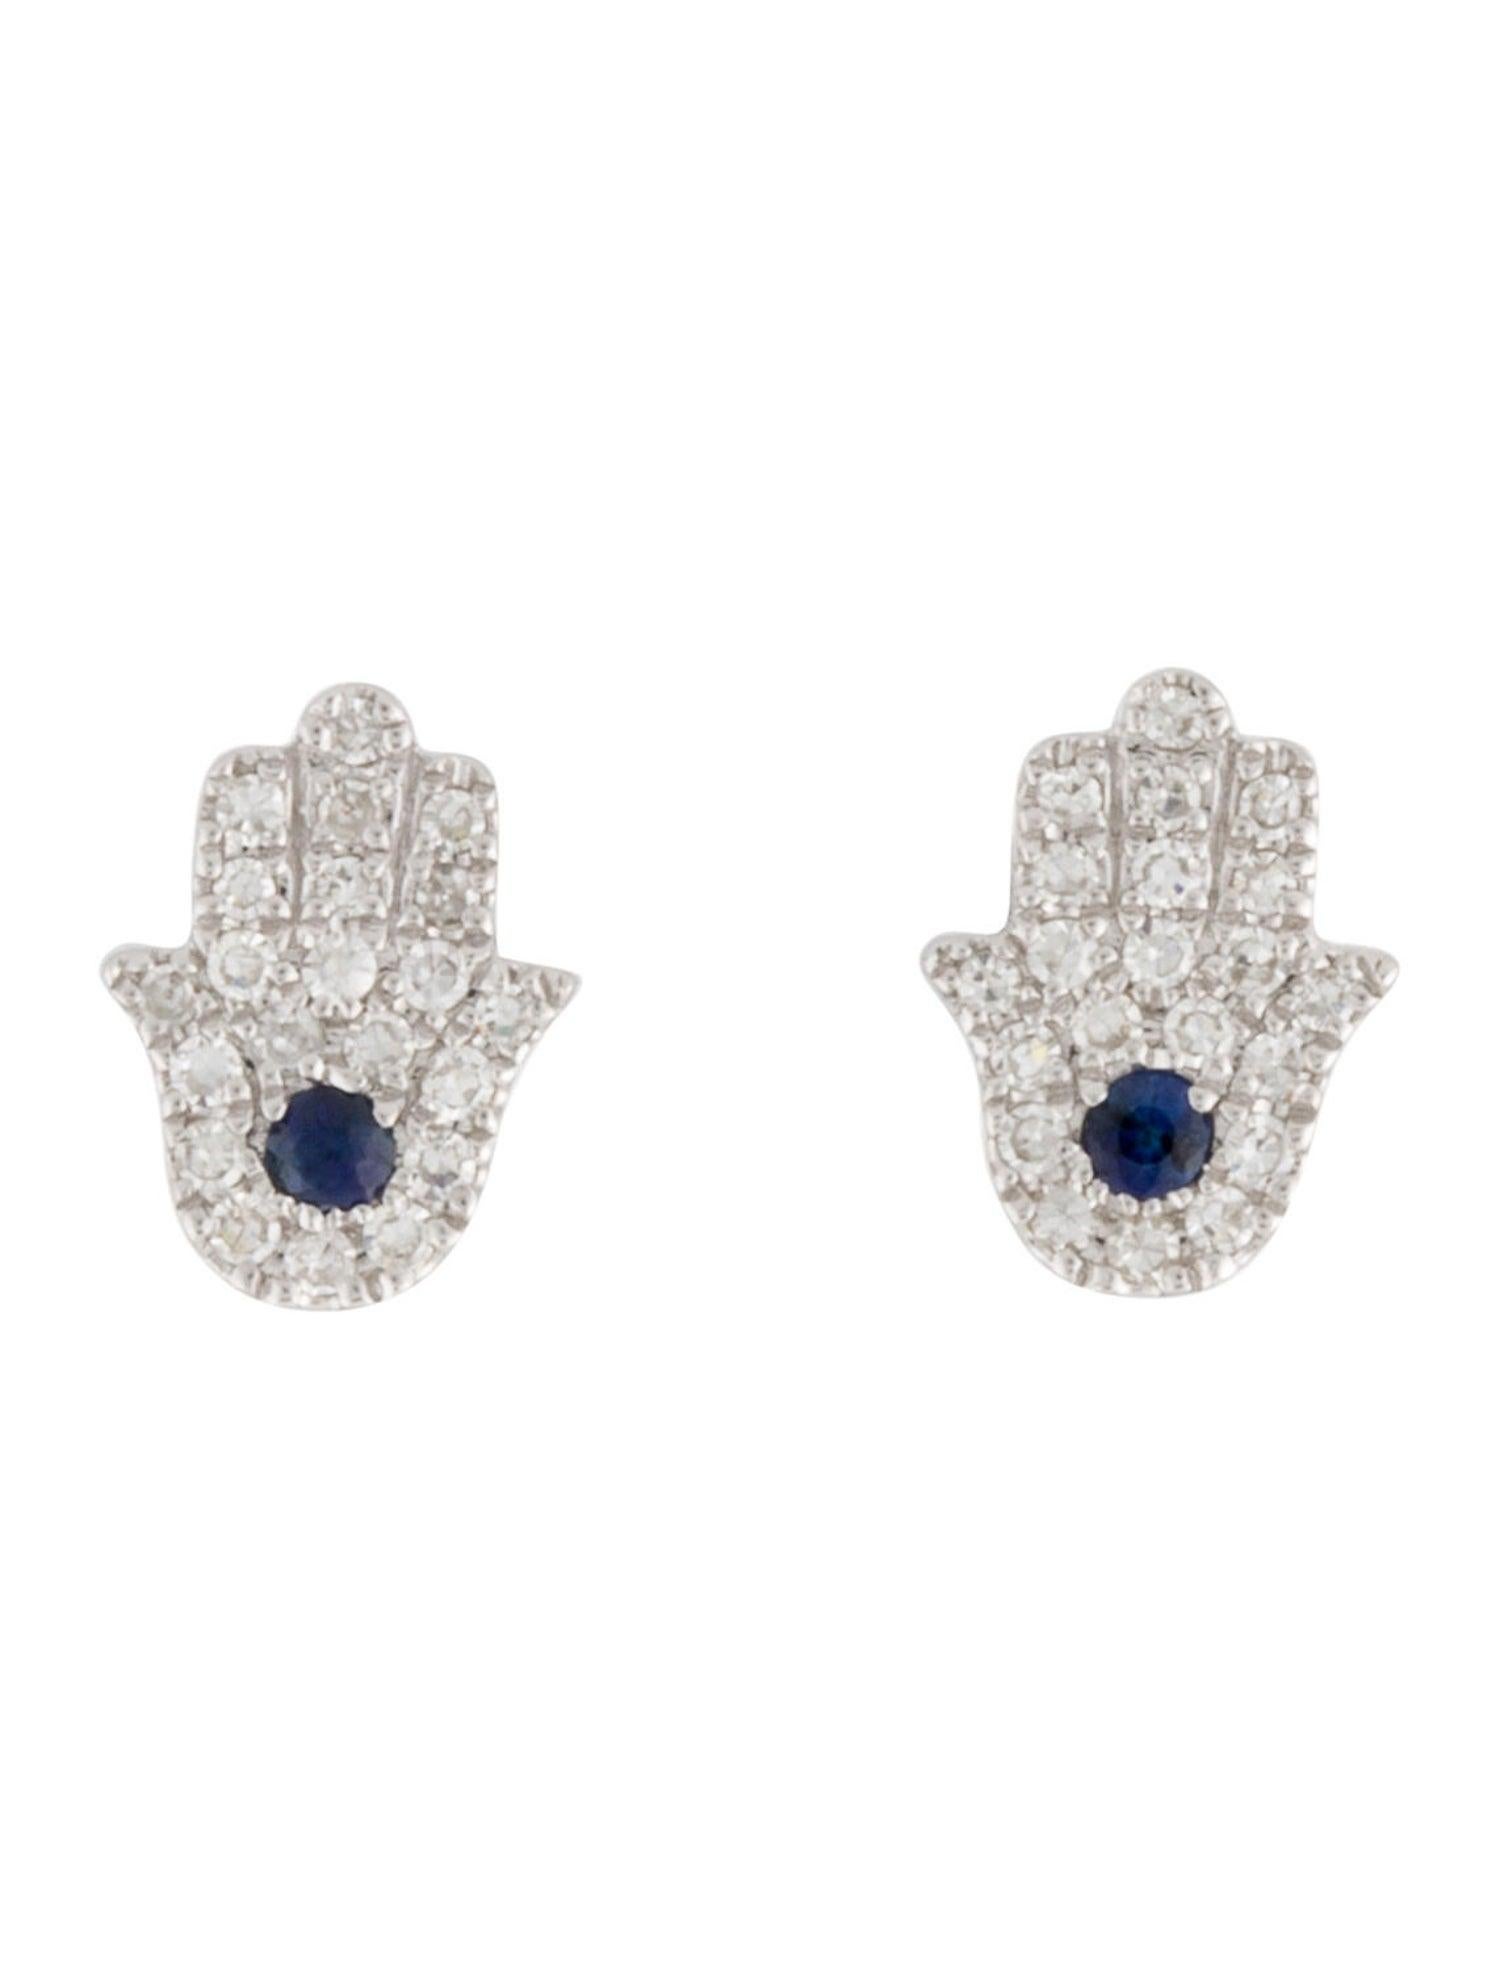 Feel protected & loved with these trendy and appealing 14k gold diamond and sapphire Hand Of Gd Studs earrings. Makes the best addition to your jewelry collection. Featuring approximately 0.11 ct. of diamonds and 0.06 ct. of sapphires. Butterfly